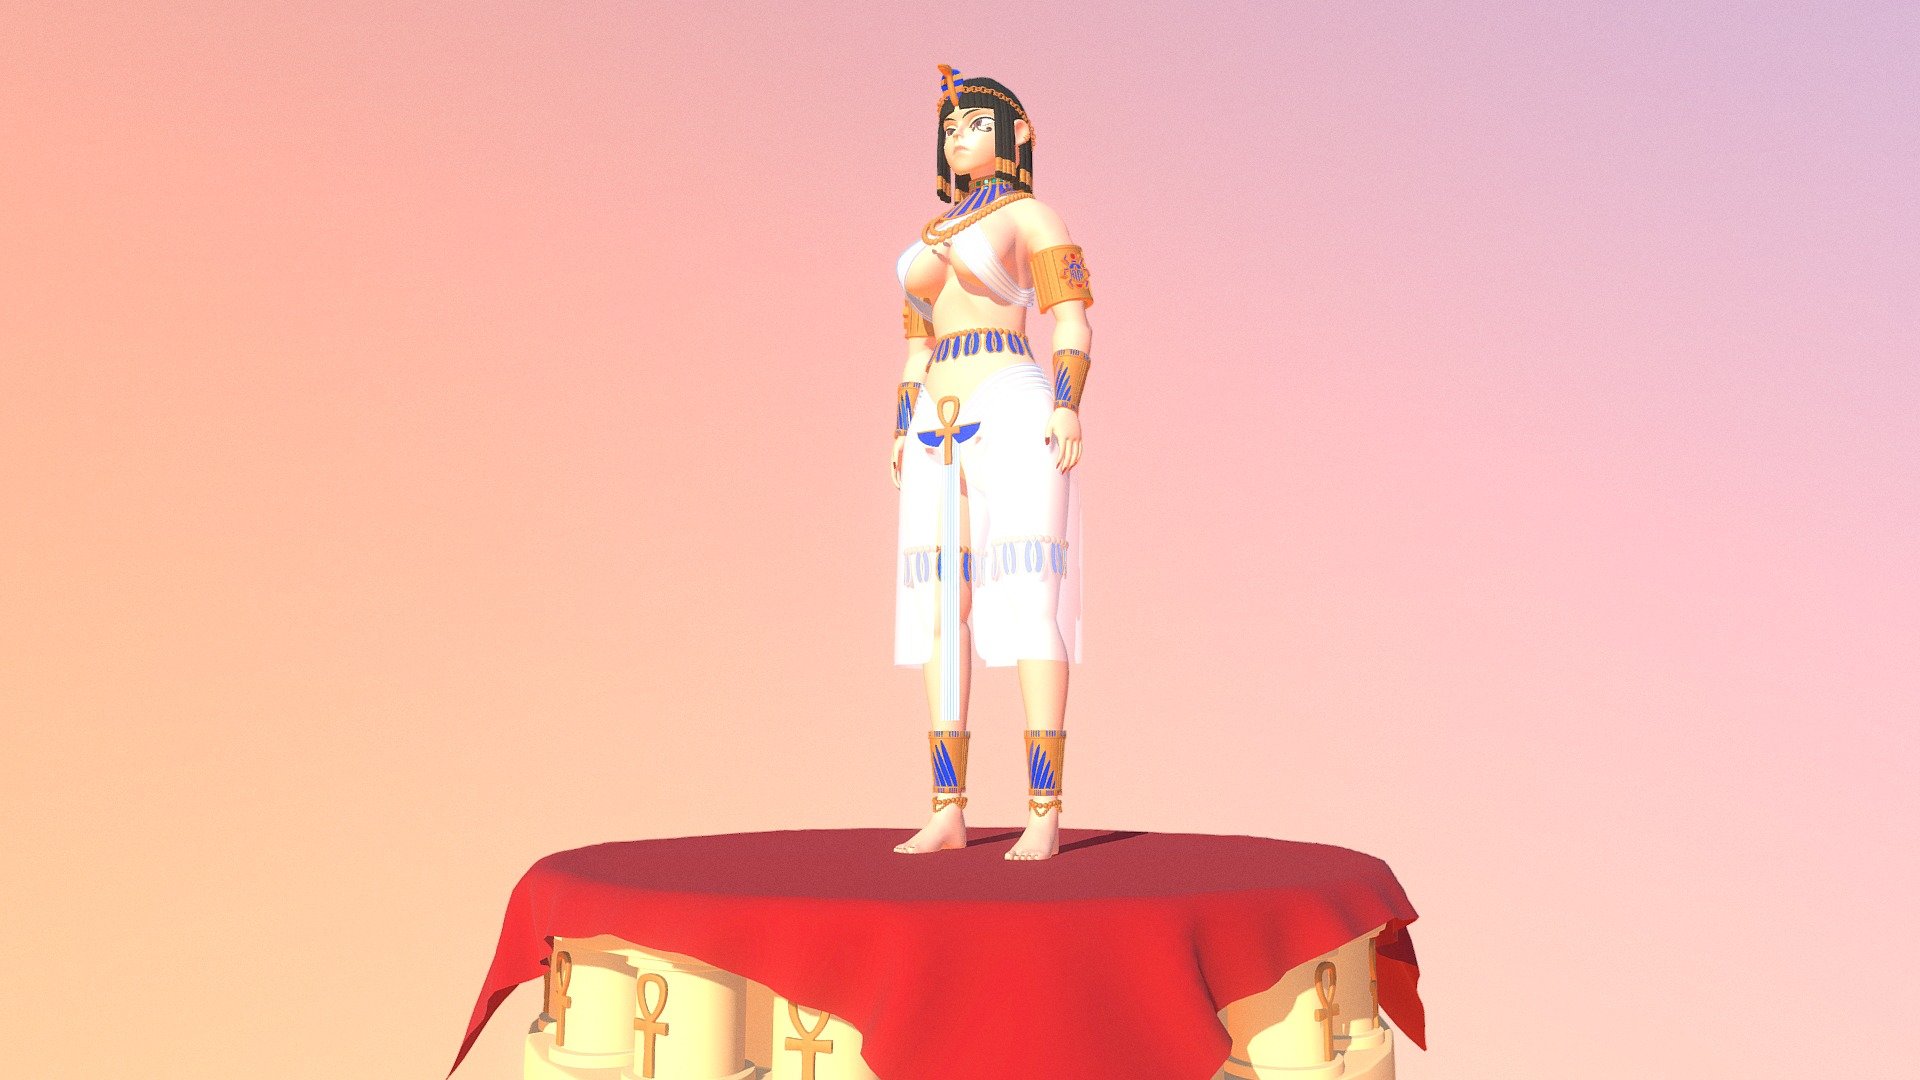 3D character of Cleopatre (improvised by me)
Too see more of my creation : https://www.deviantart.com/brian81320 - Cleopatre VII - 3D model by brian81320 3d model